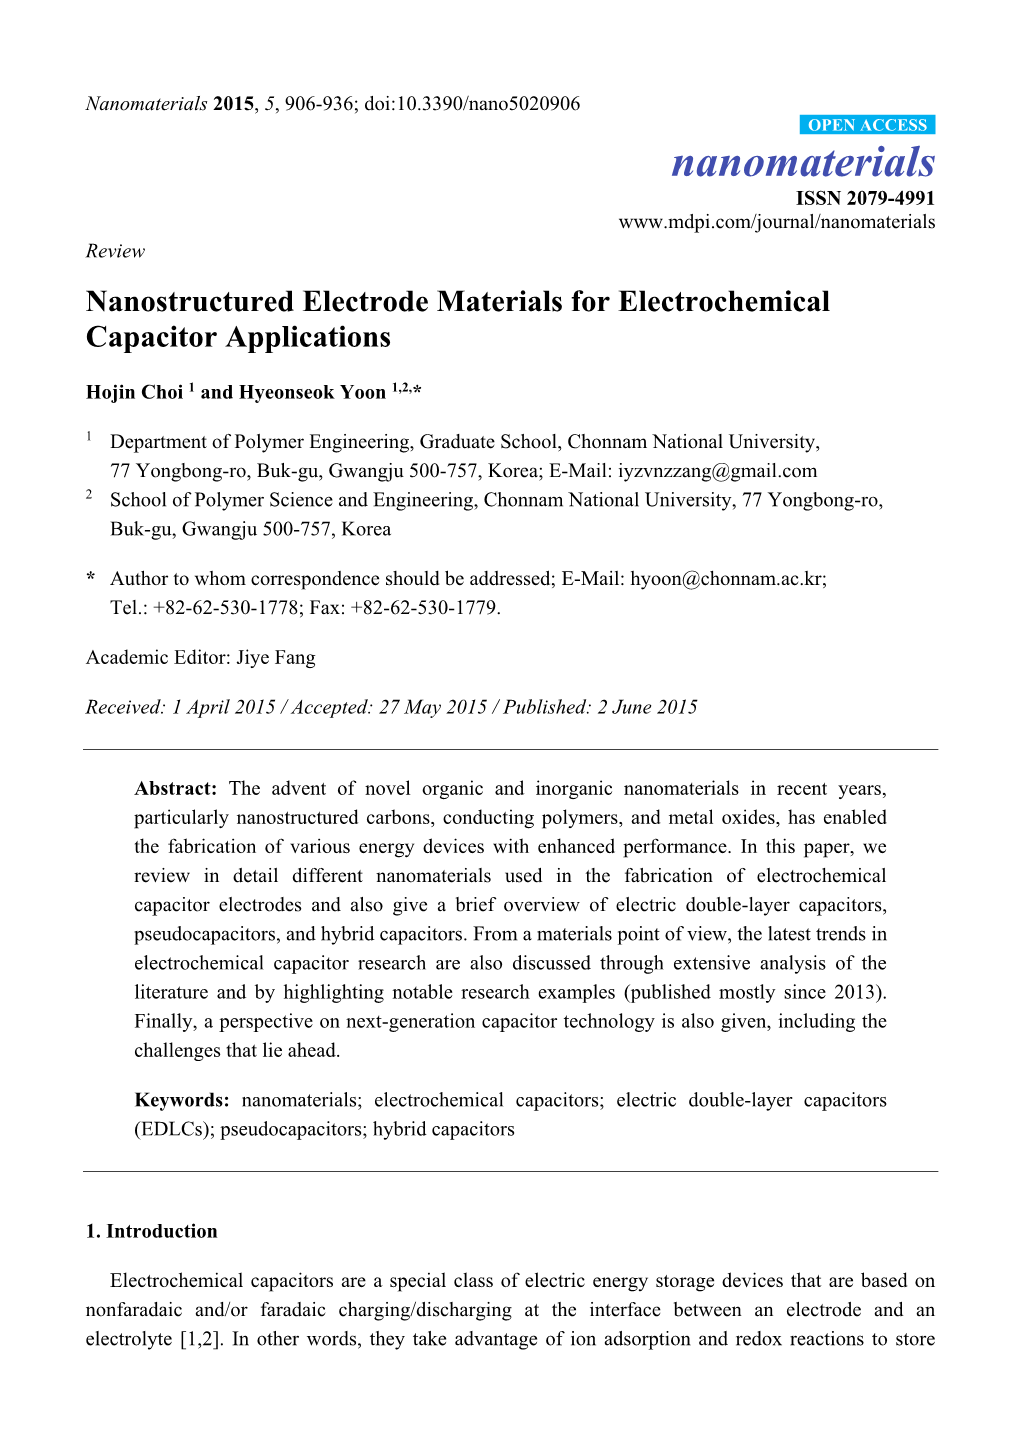 Nanostructured Electrode Materials for Electrochemical Capacitor Applications